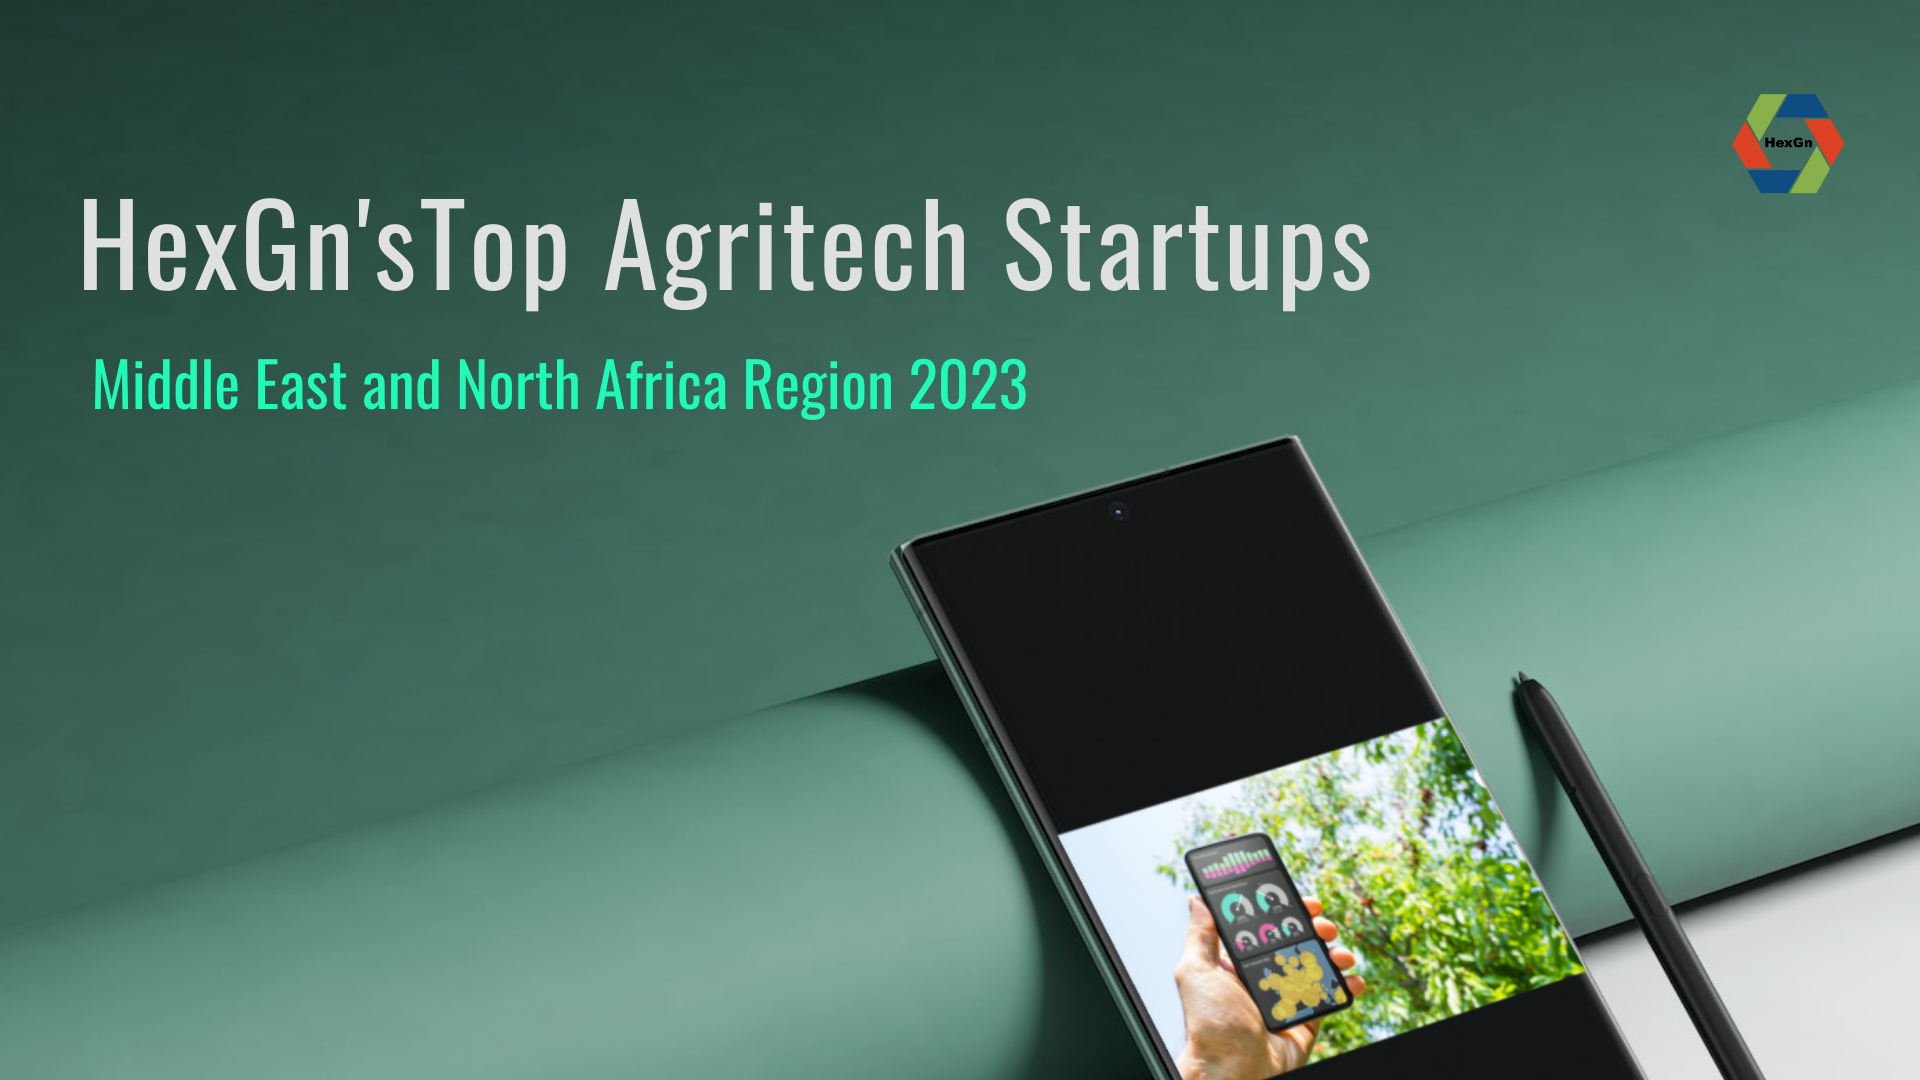 HexGn'sTop Agritech Startups Middle East and North Africa Region 2023